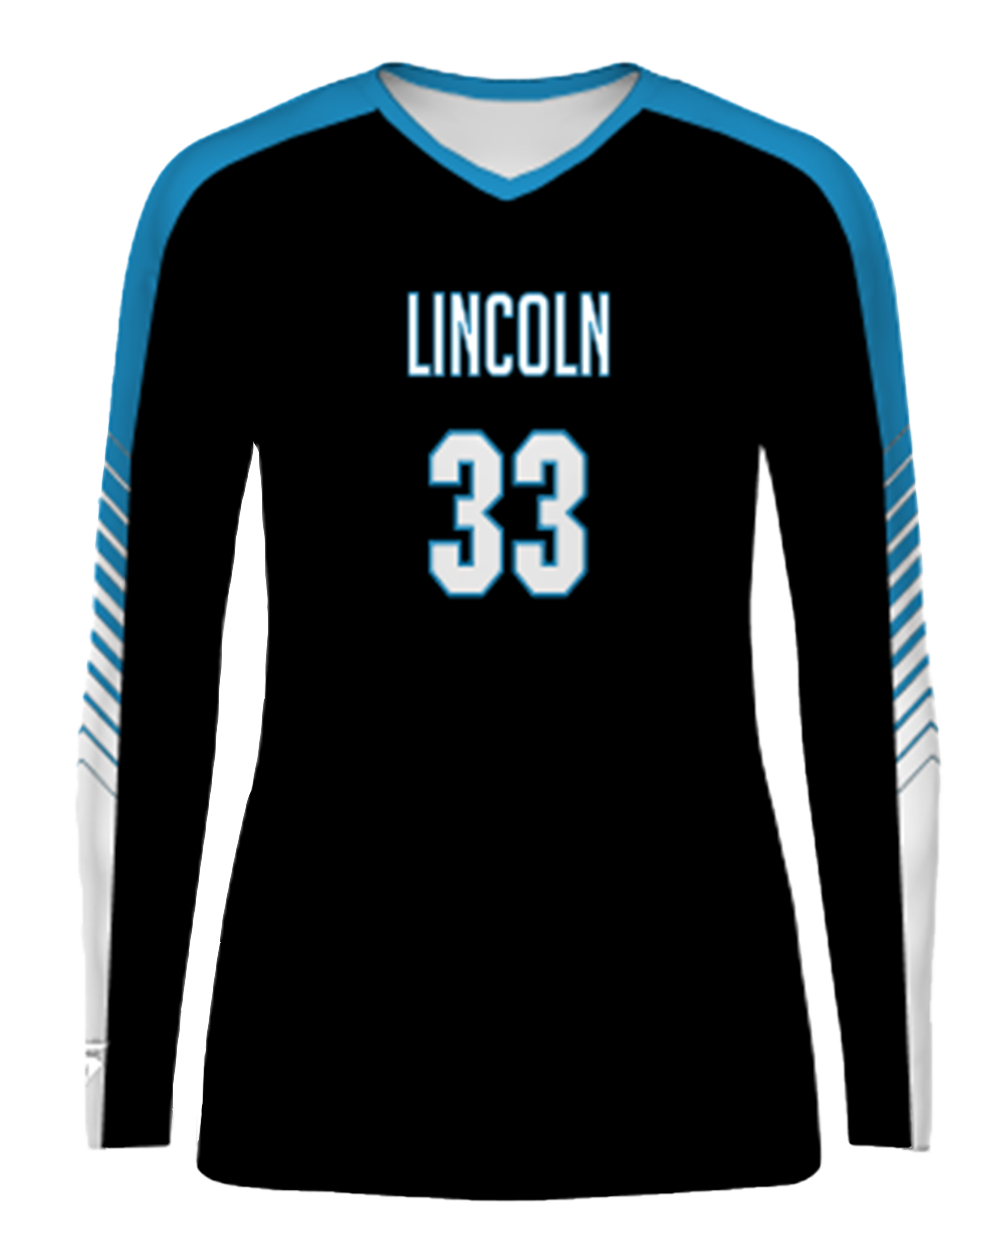 Shattered Women's Sublimated Volleyball Jersey